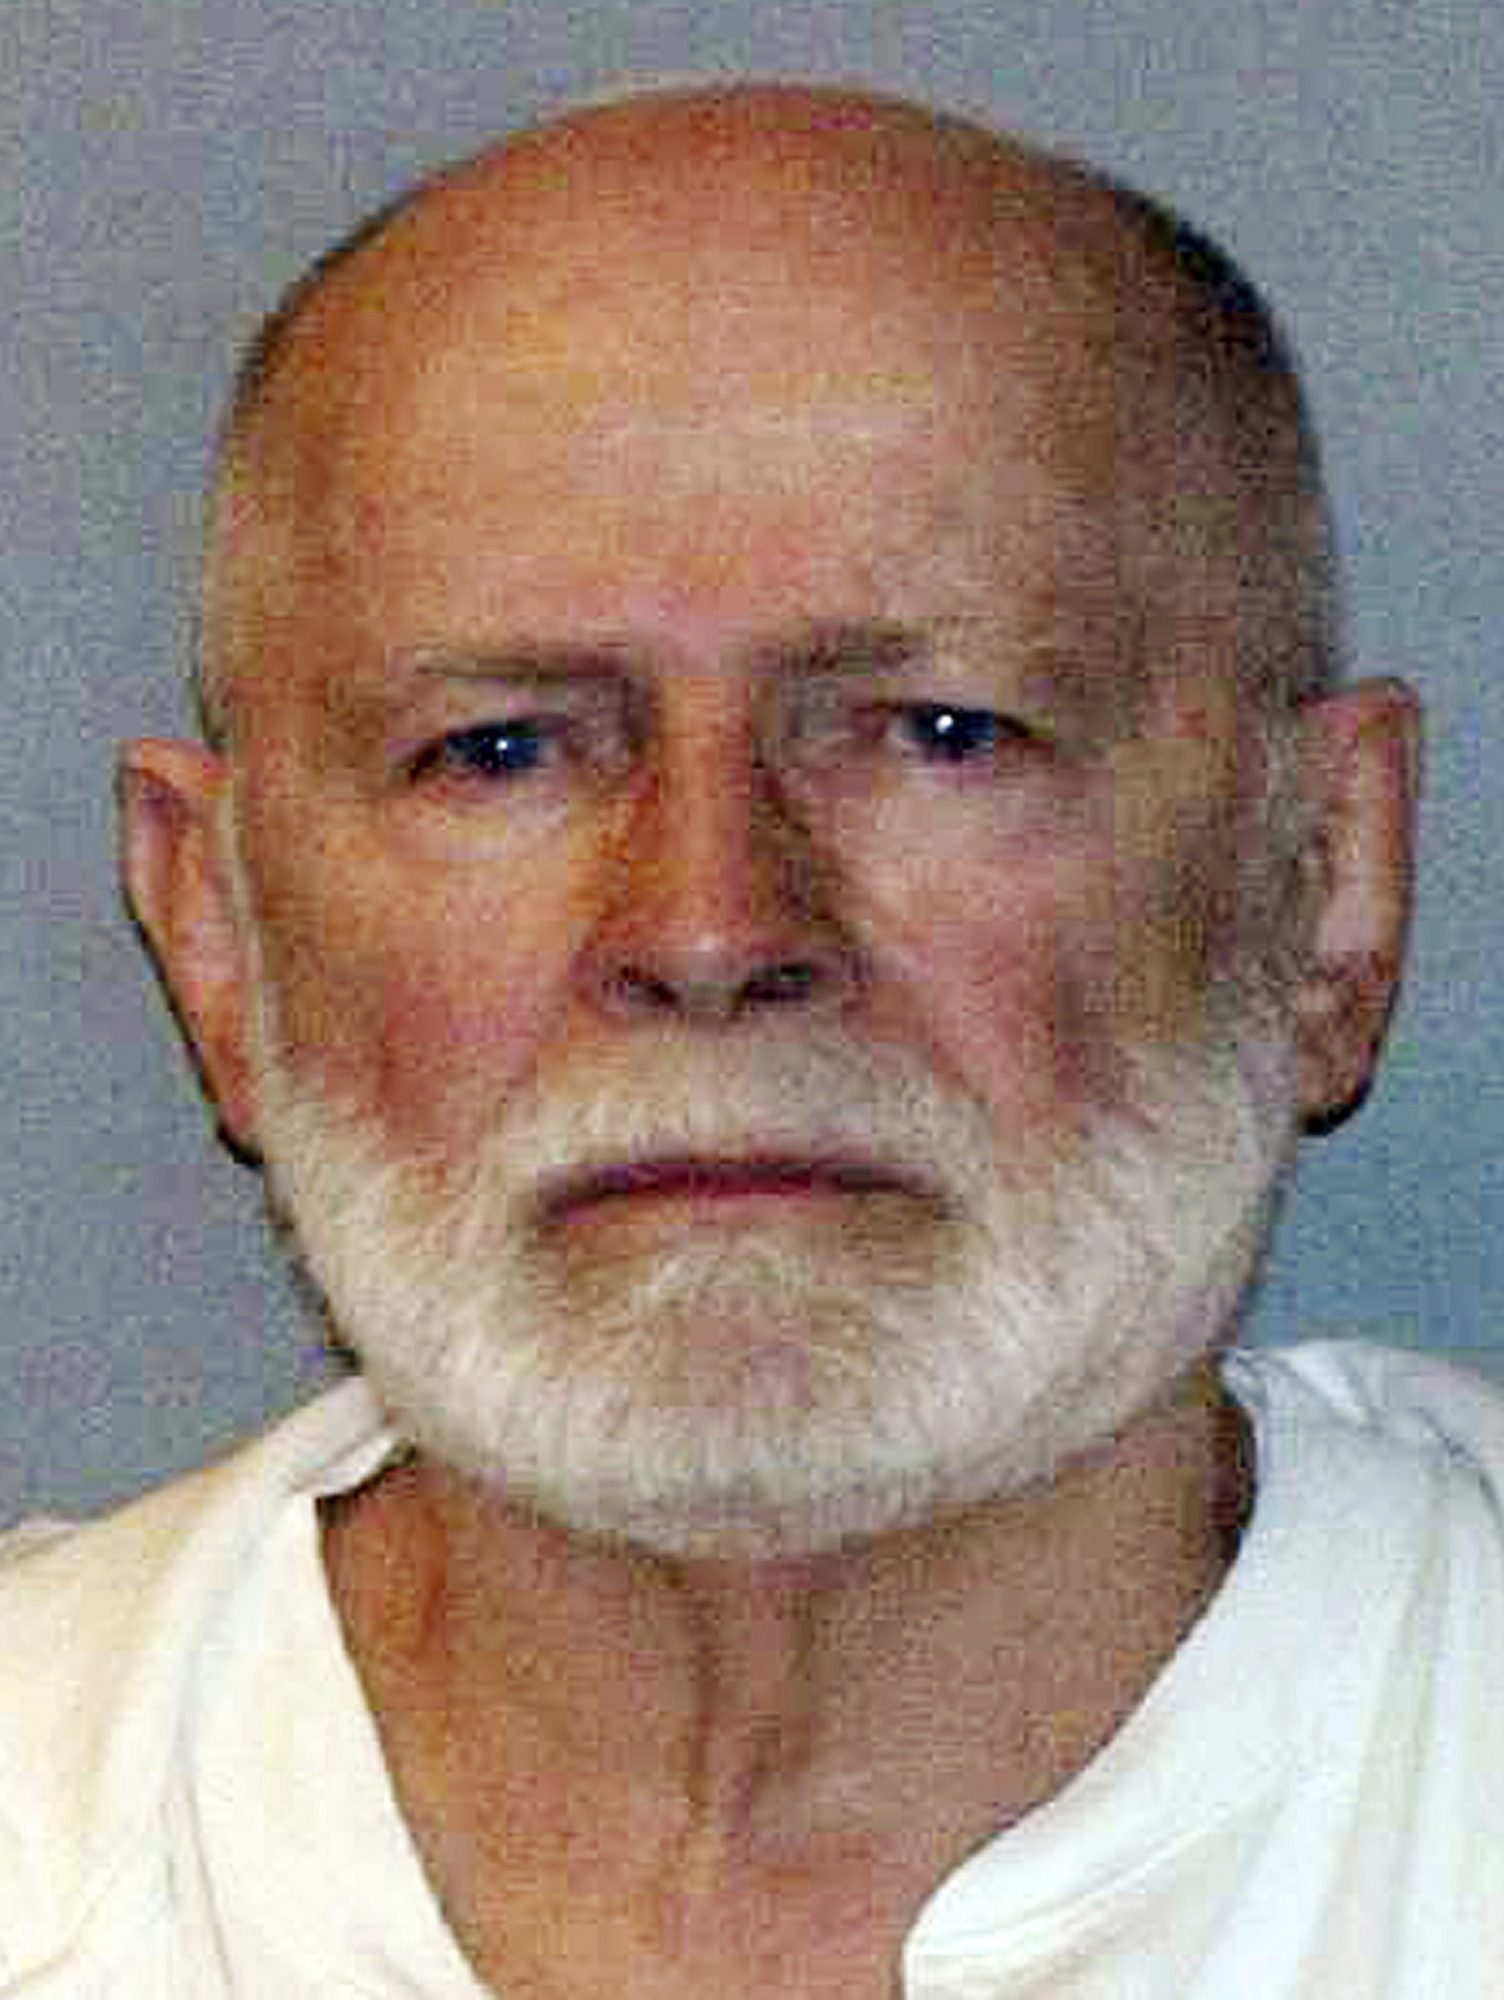 PHOTO: Booking photo provided by the U.S. Marshals Service shows James &quot;Whitey&quot; Bulger.